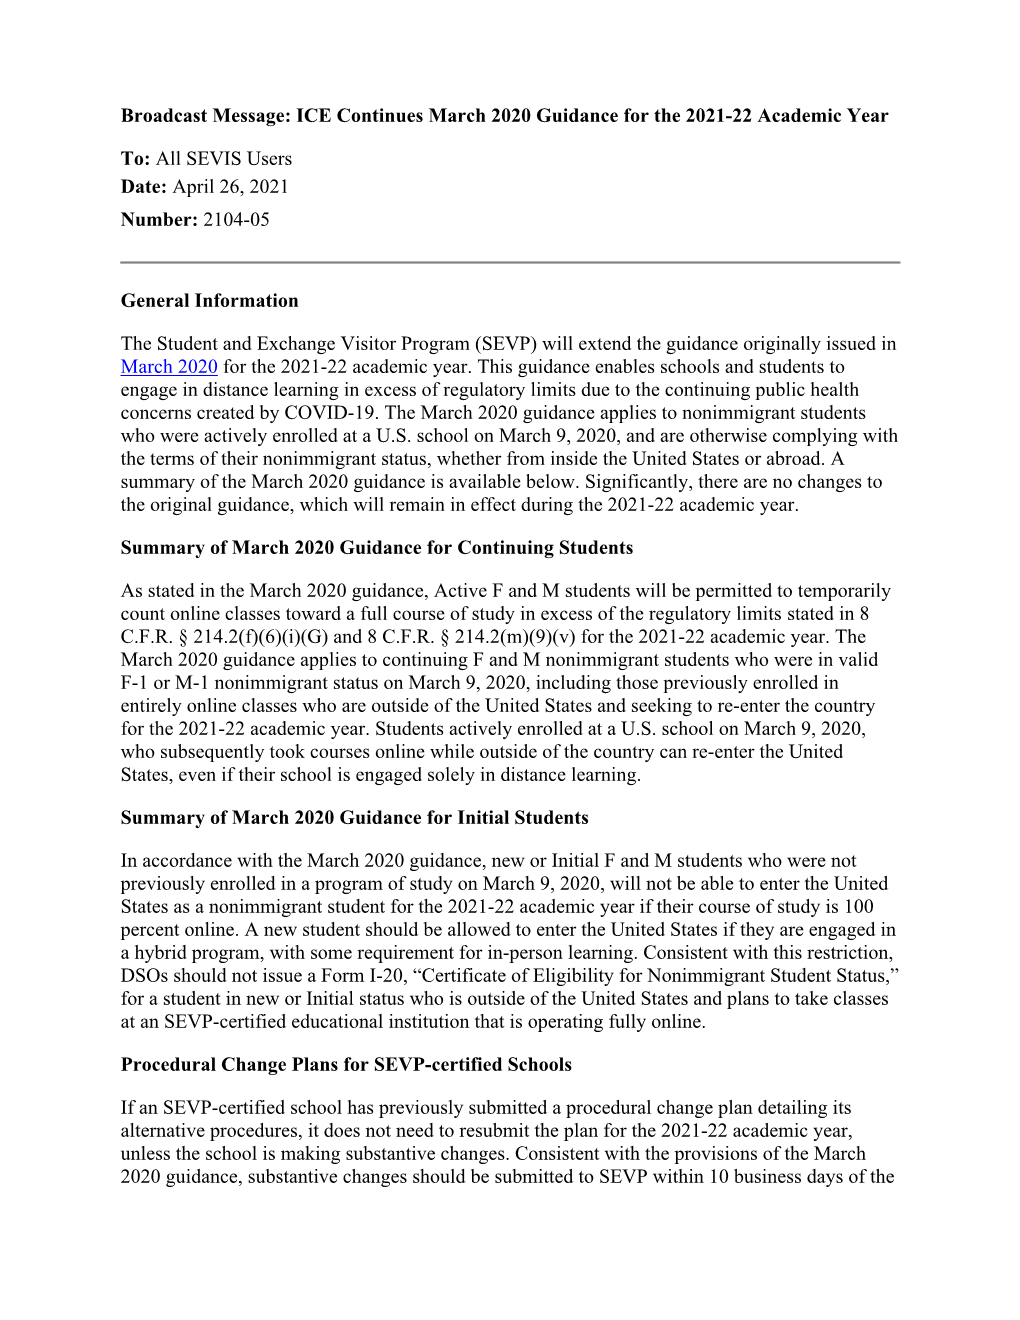 Broadcast Message: ICE Continues March 2020 Guidance to 2021-22 Academic Year